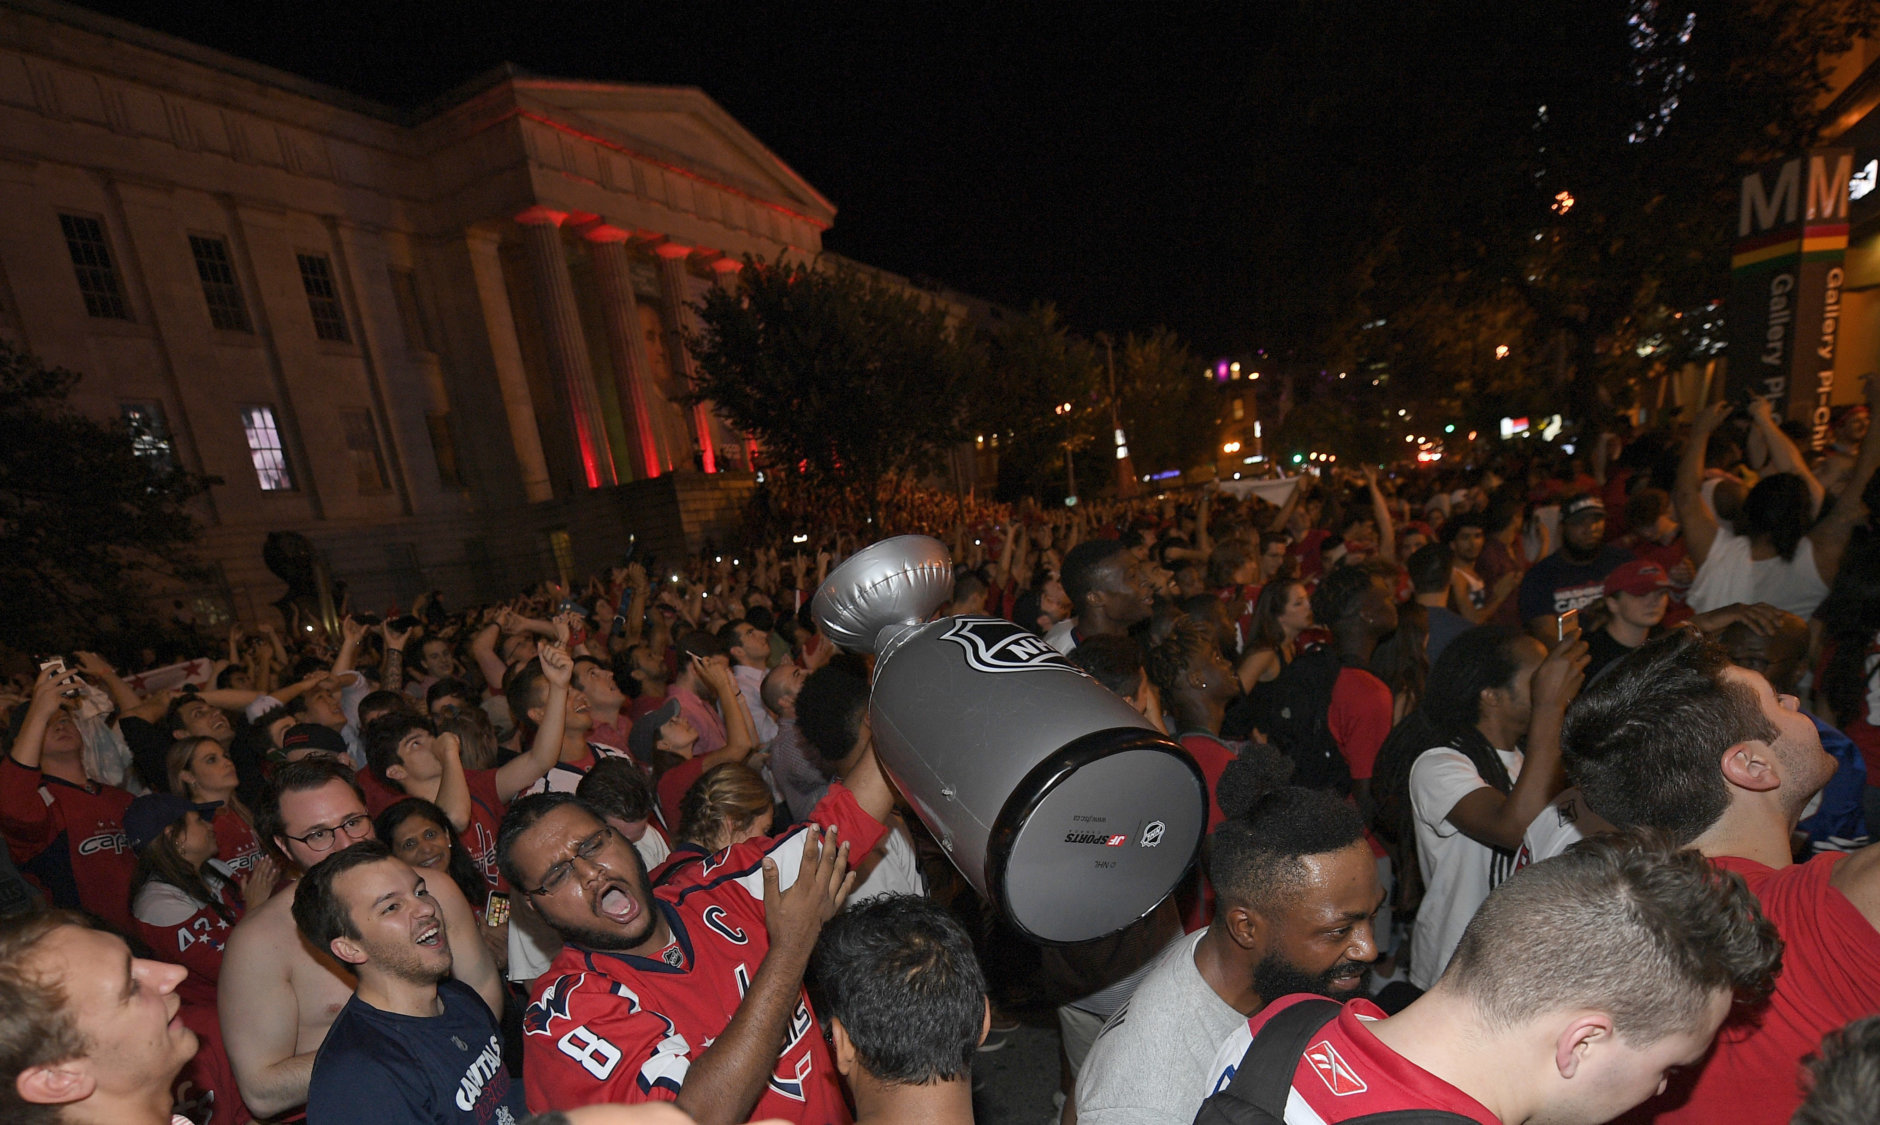 Washington Capitals fans celebrate in the streets outside Capital One Arena after Game 5 of the NHL hockey Stanley Cup Final between the Washington Capitals and the Vegas Golden Knights in Las Vegas, Thursday, June 7, 2018, in Washington. The Capitals won the Stanley Cup with a 4-3 win Thursday night. (AP Photo/Nick Wass)